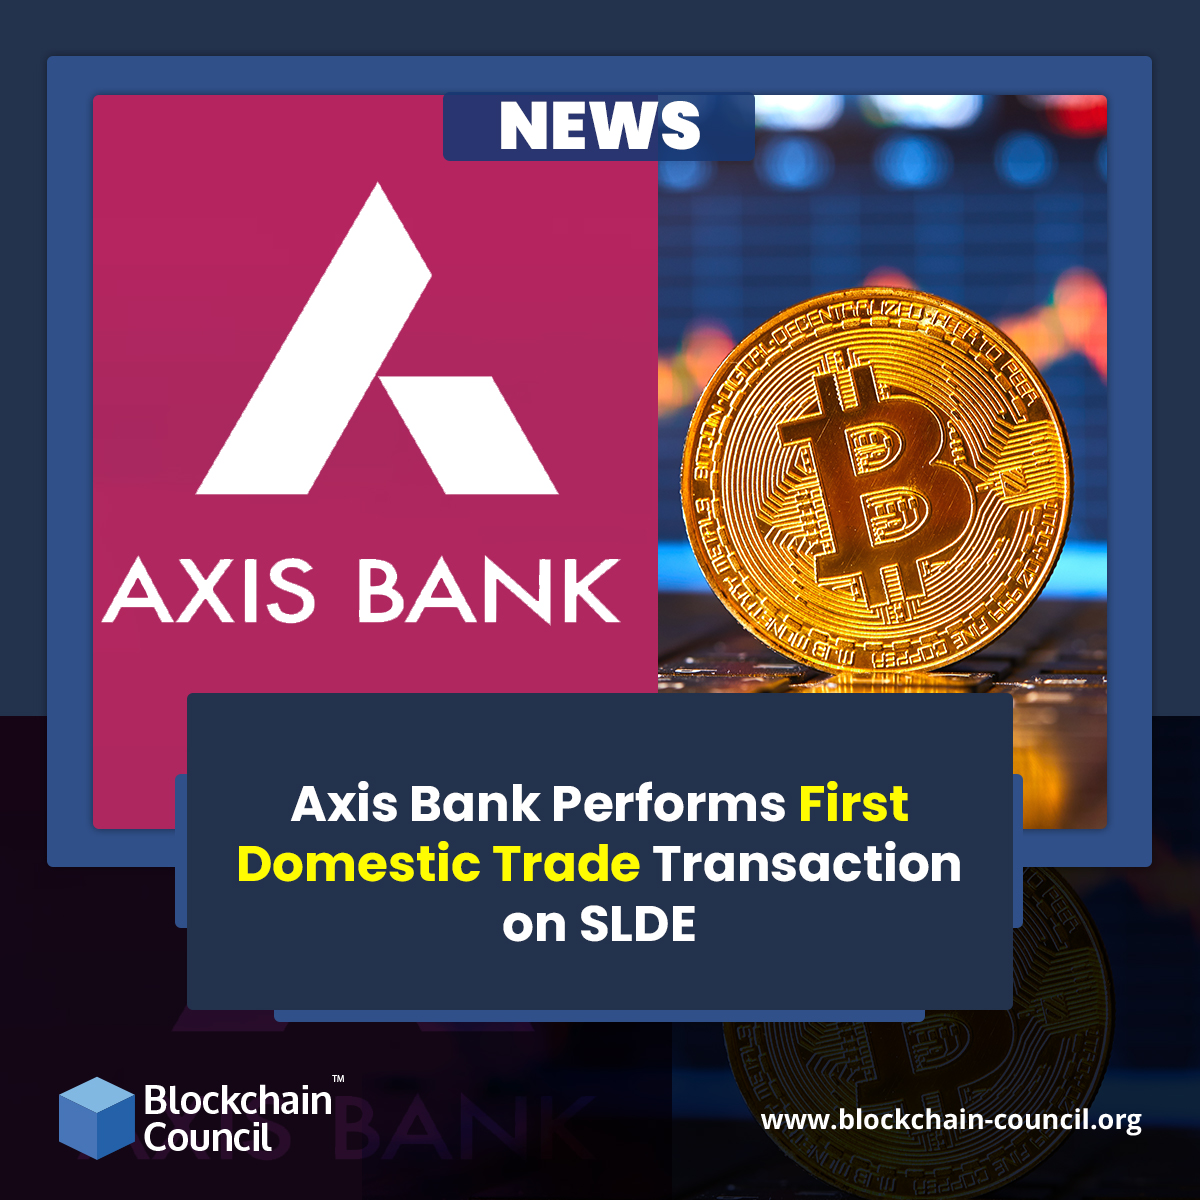 Axis Bank Performs First Domestic Trade Transaction on SLDE